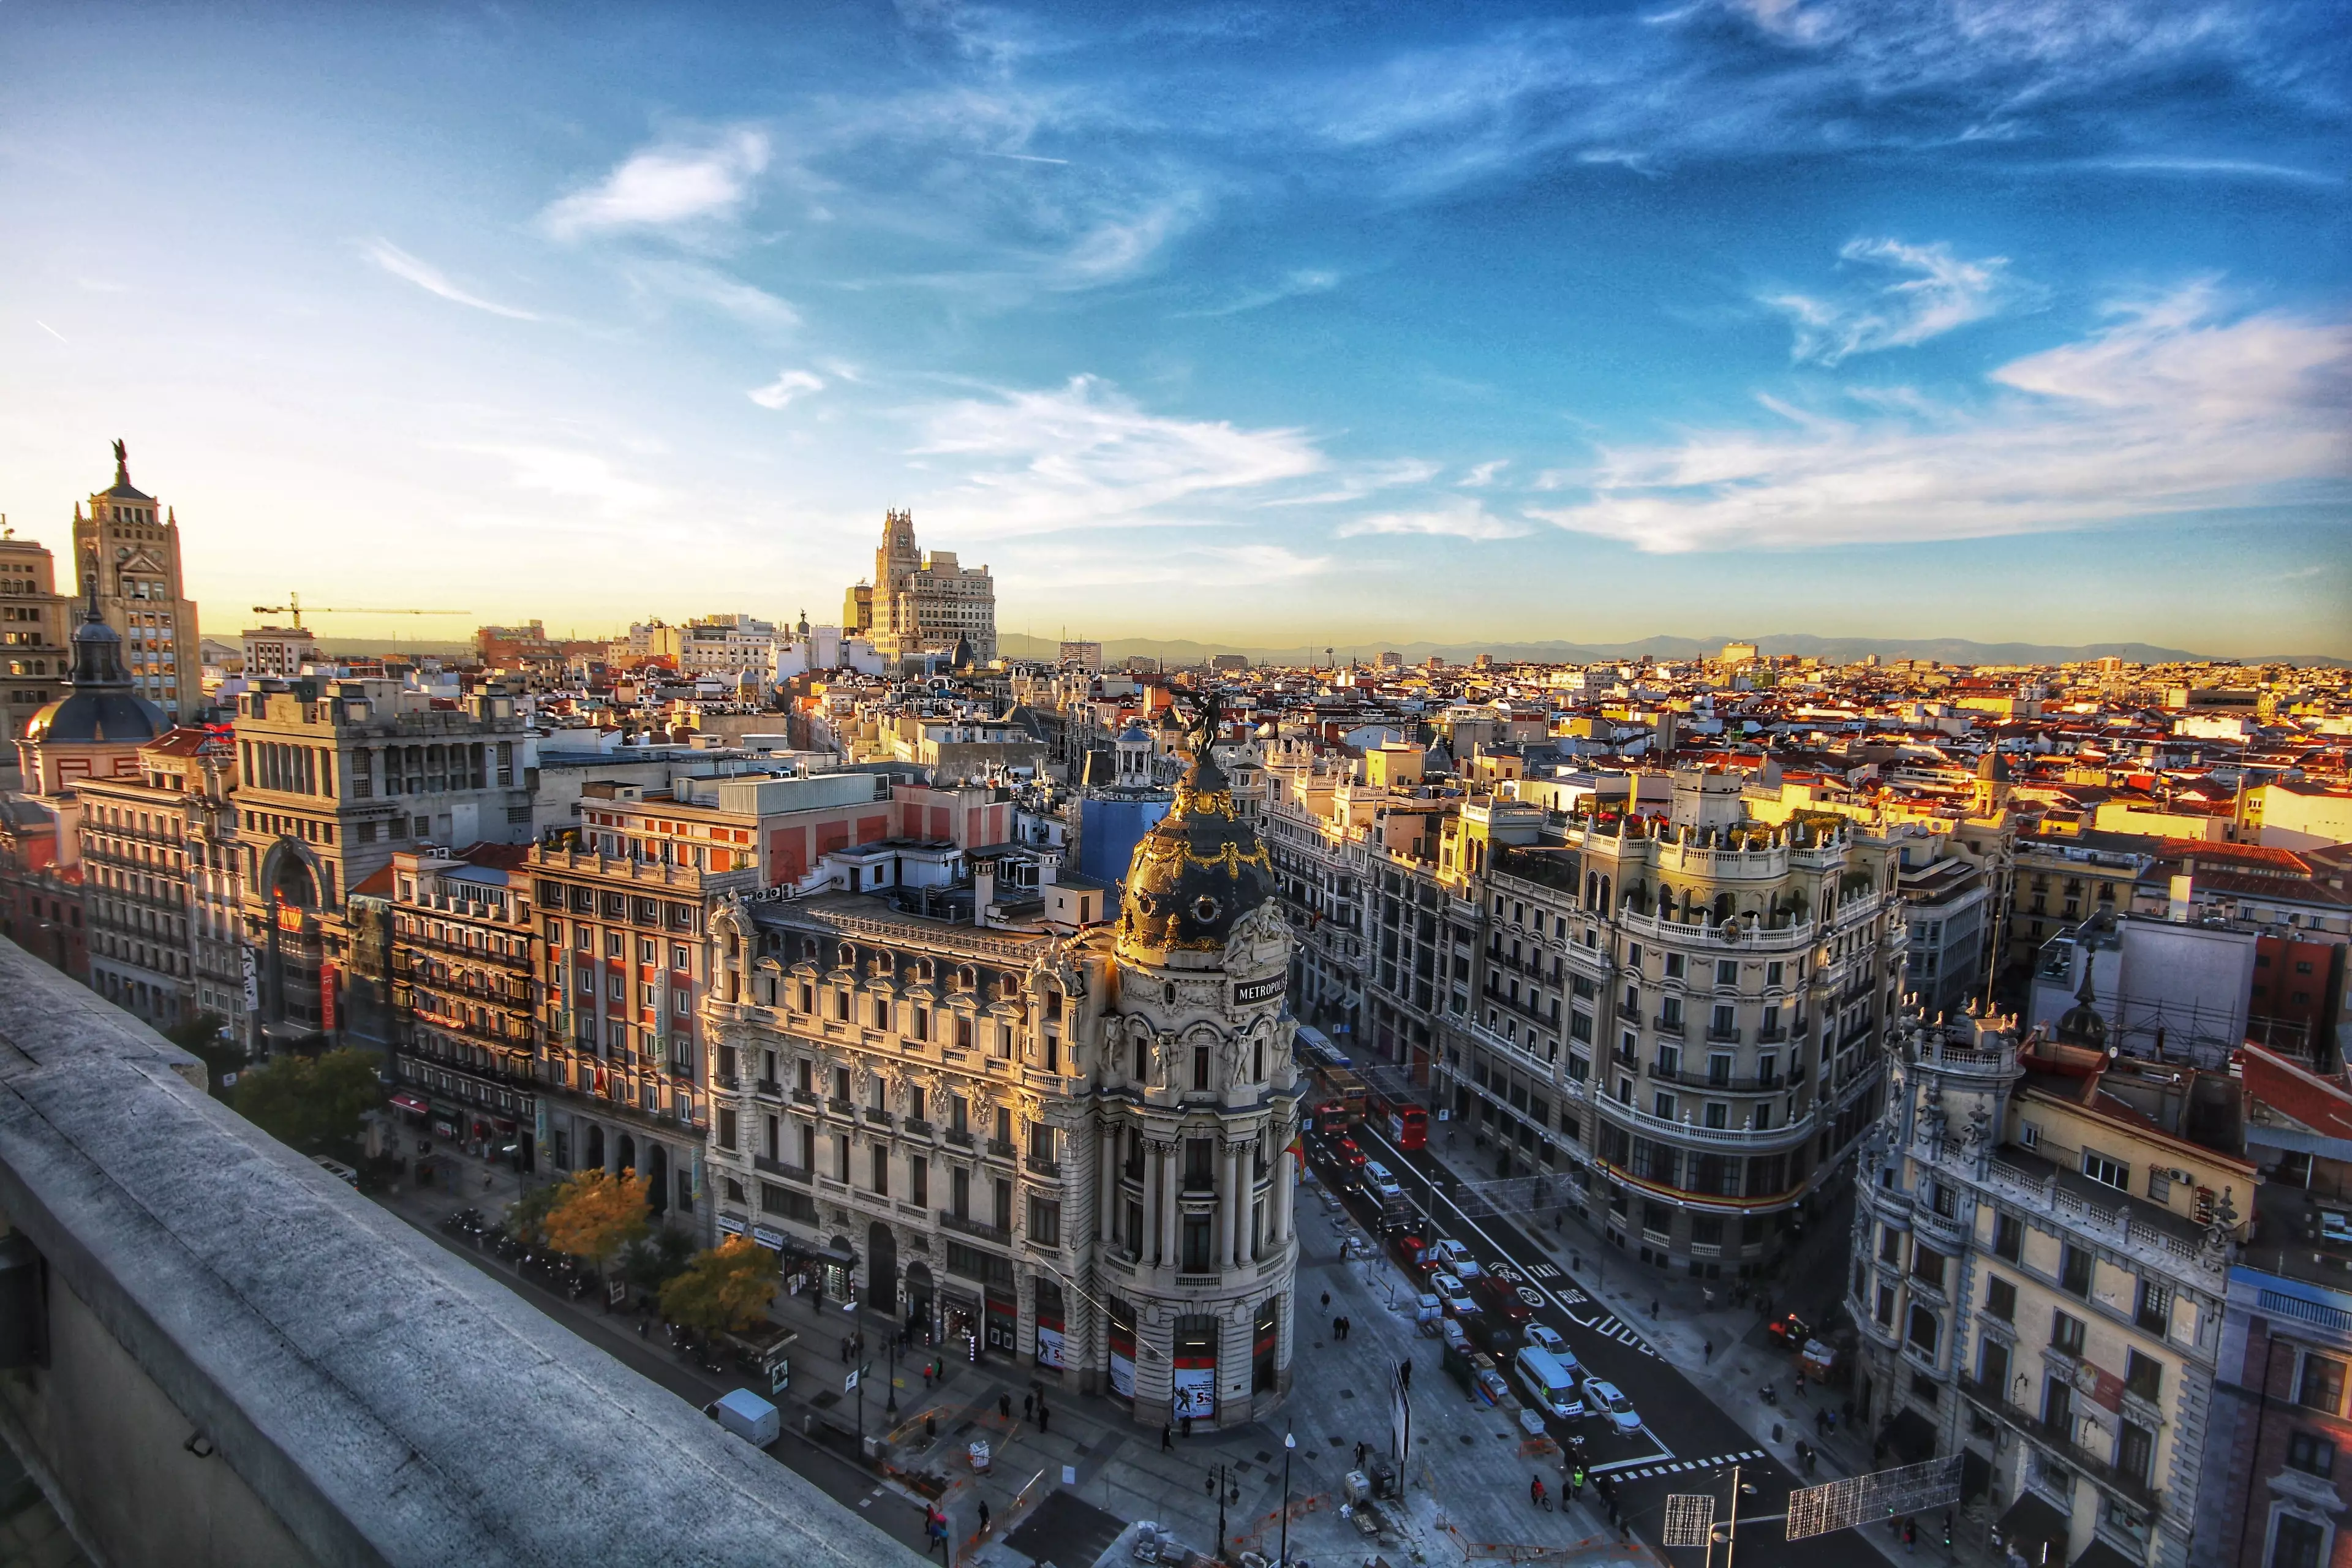 You can fly to Madrid one way for as little as £12.99 (